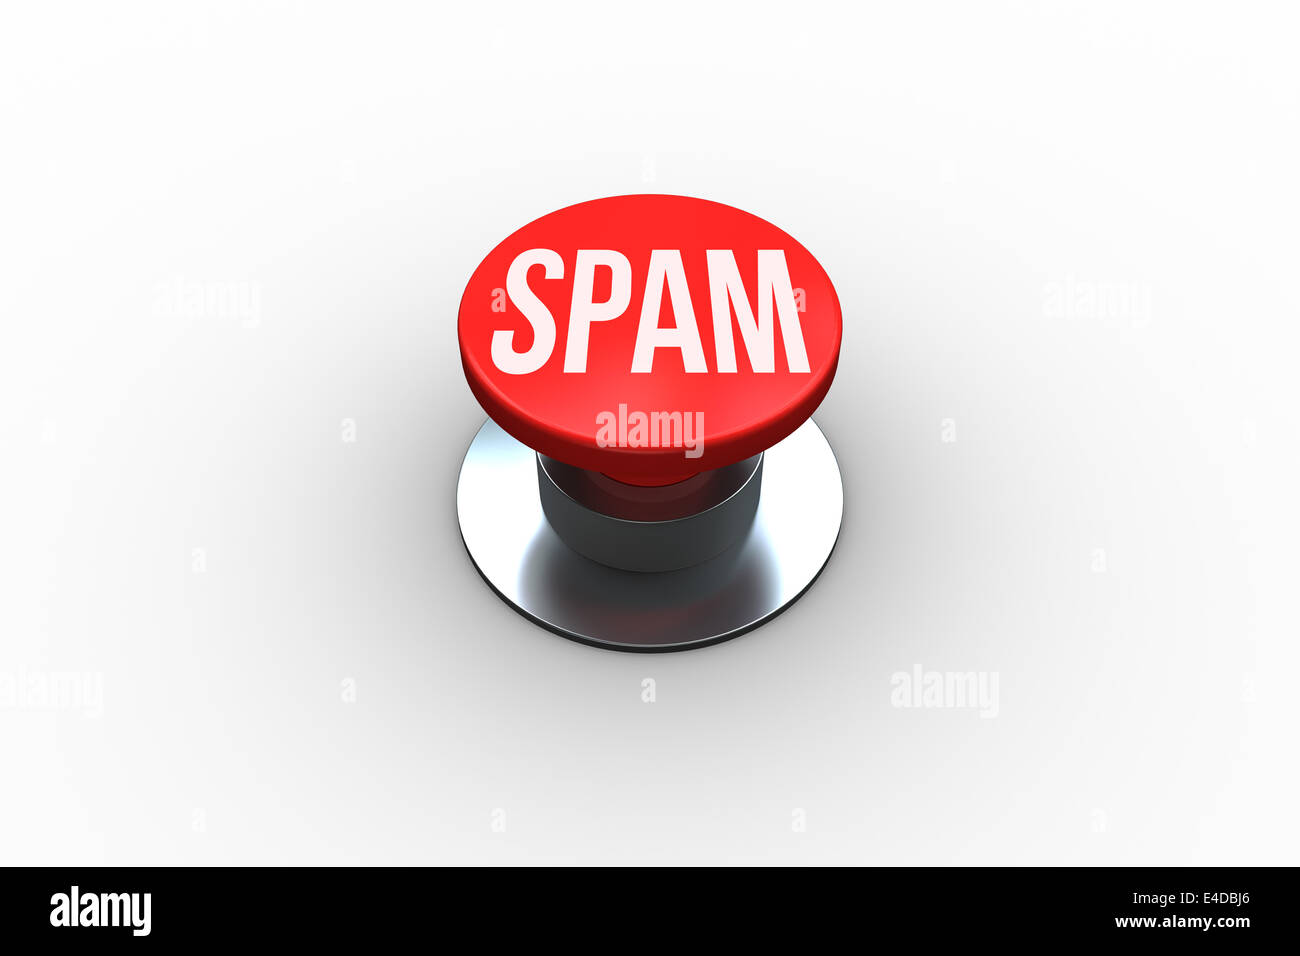 Spam on digitally generated red push button Stock Photo